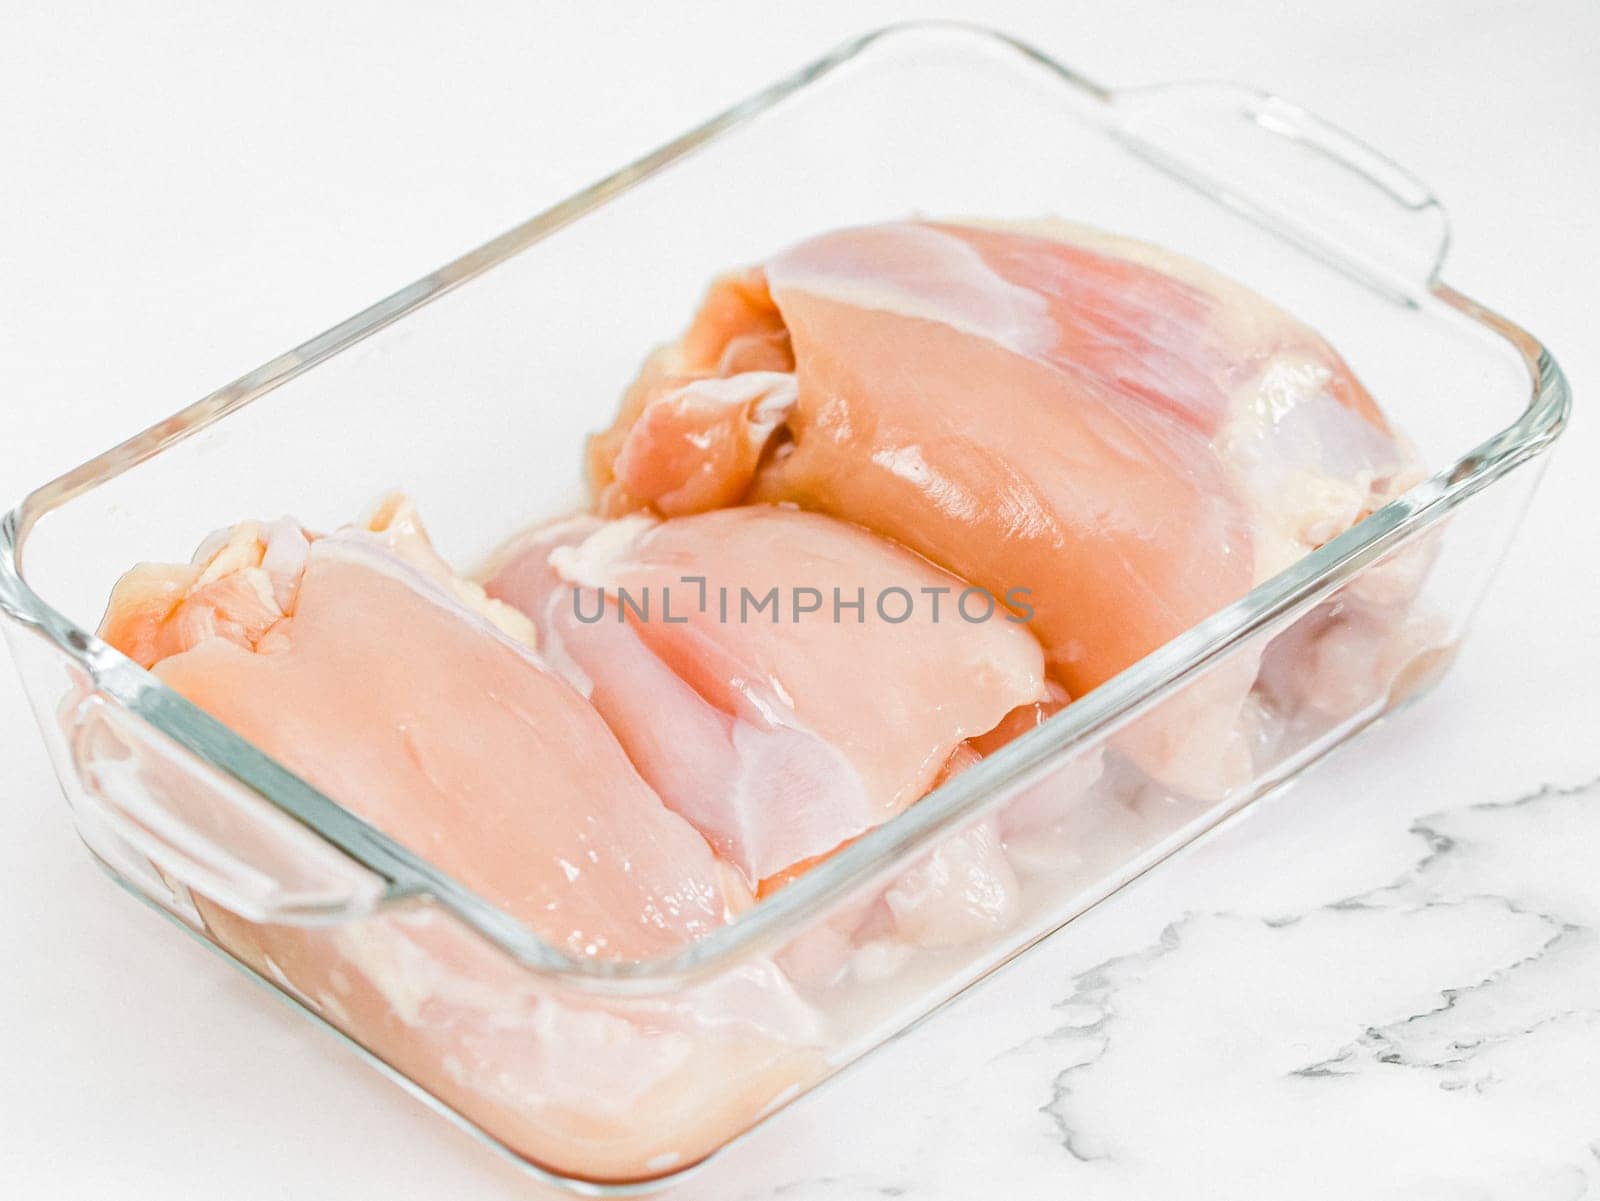 Raw boneless chicken thigh meat lies in a glass baking dish on a white marble table, close-up side view. Concept of raw chicken meat, raw food.